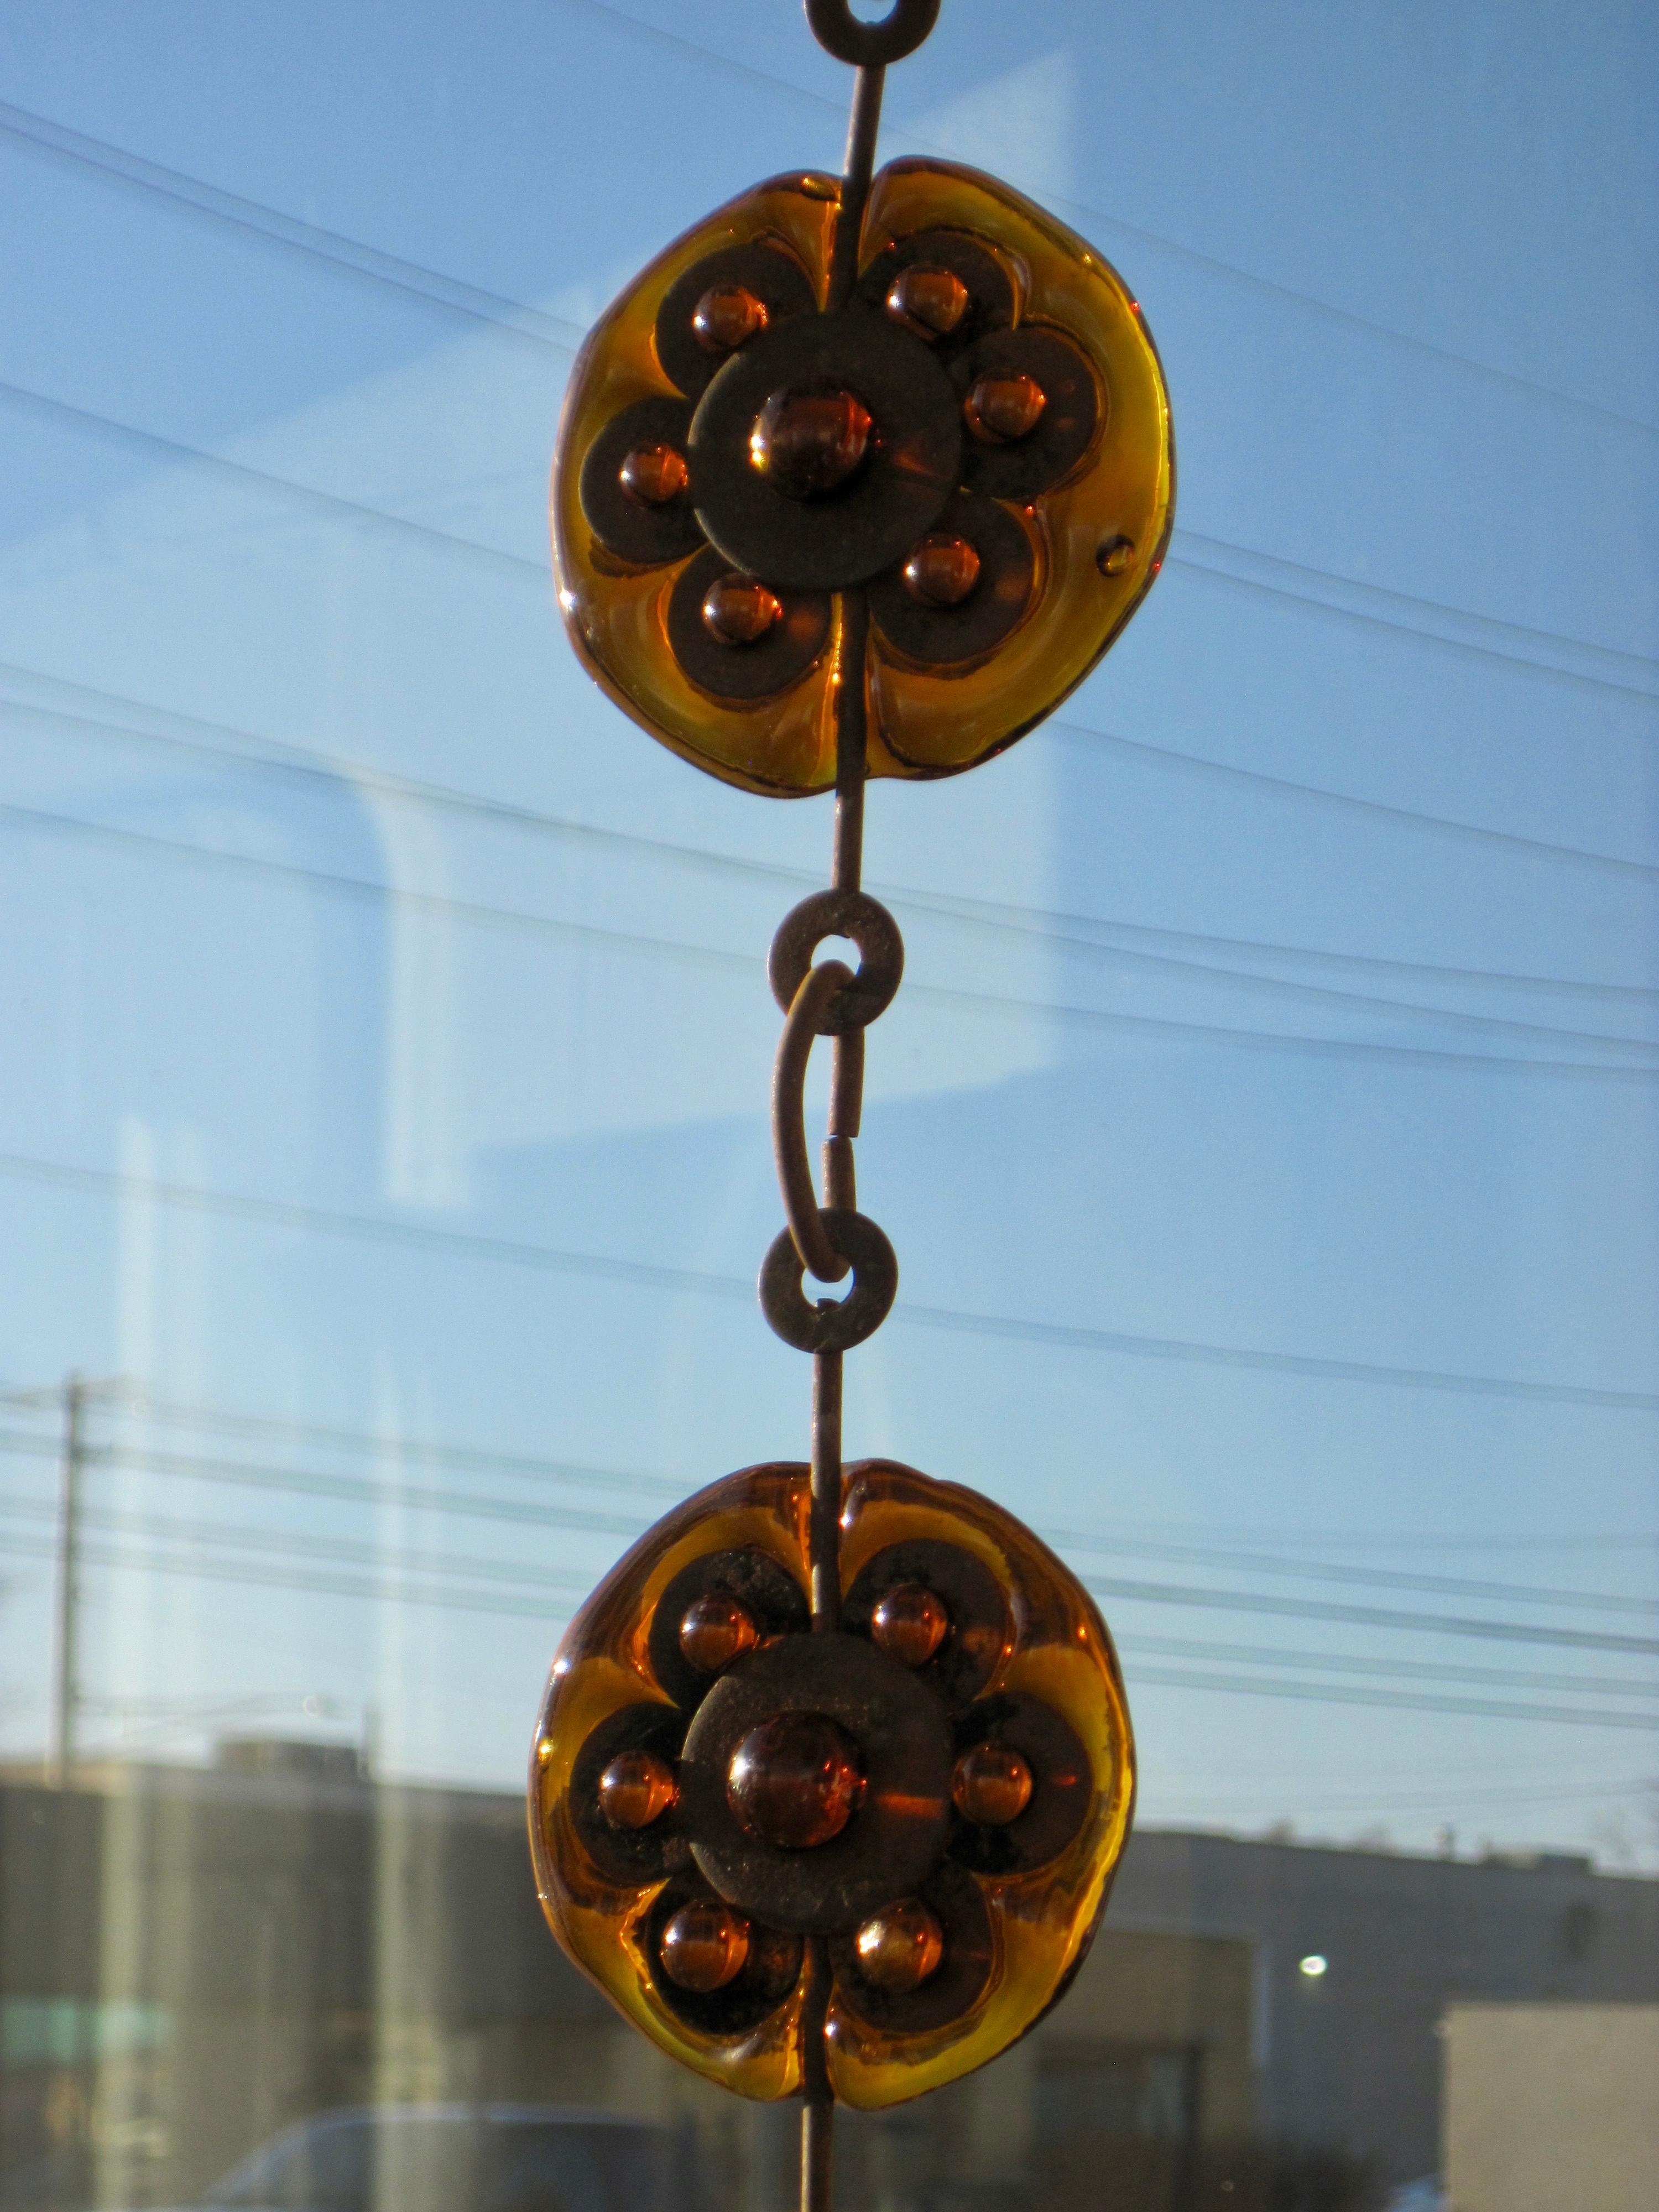 A Felipe Delfinger sun catcher made of amber art glass sculpted and protruding through iron circles creating daisy-like round flowers. Eleven flowers attached by iron rings hang down 76 inches long, catching the sun beautifully and the patinated